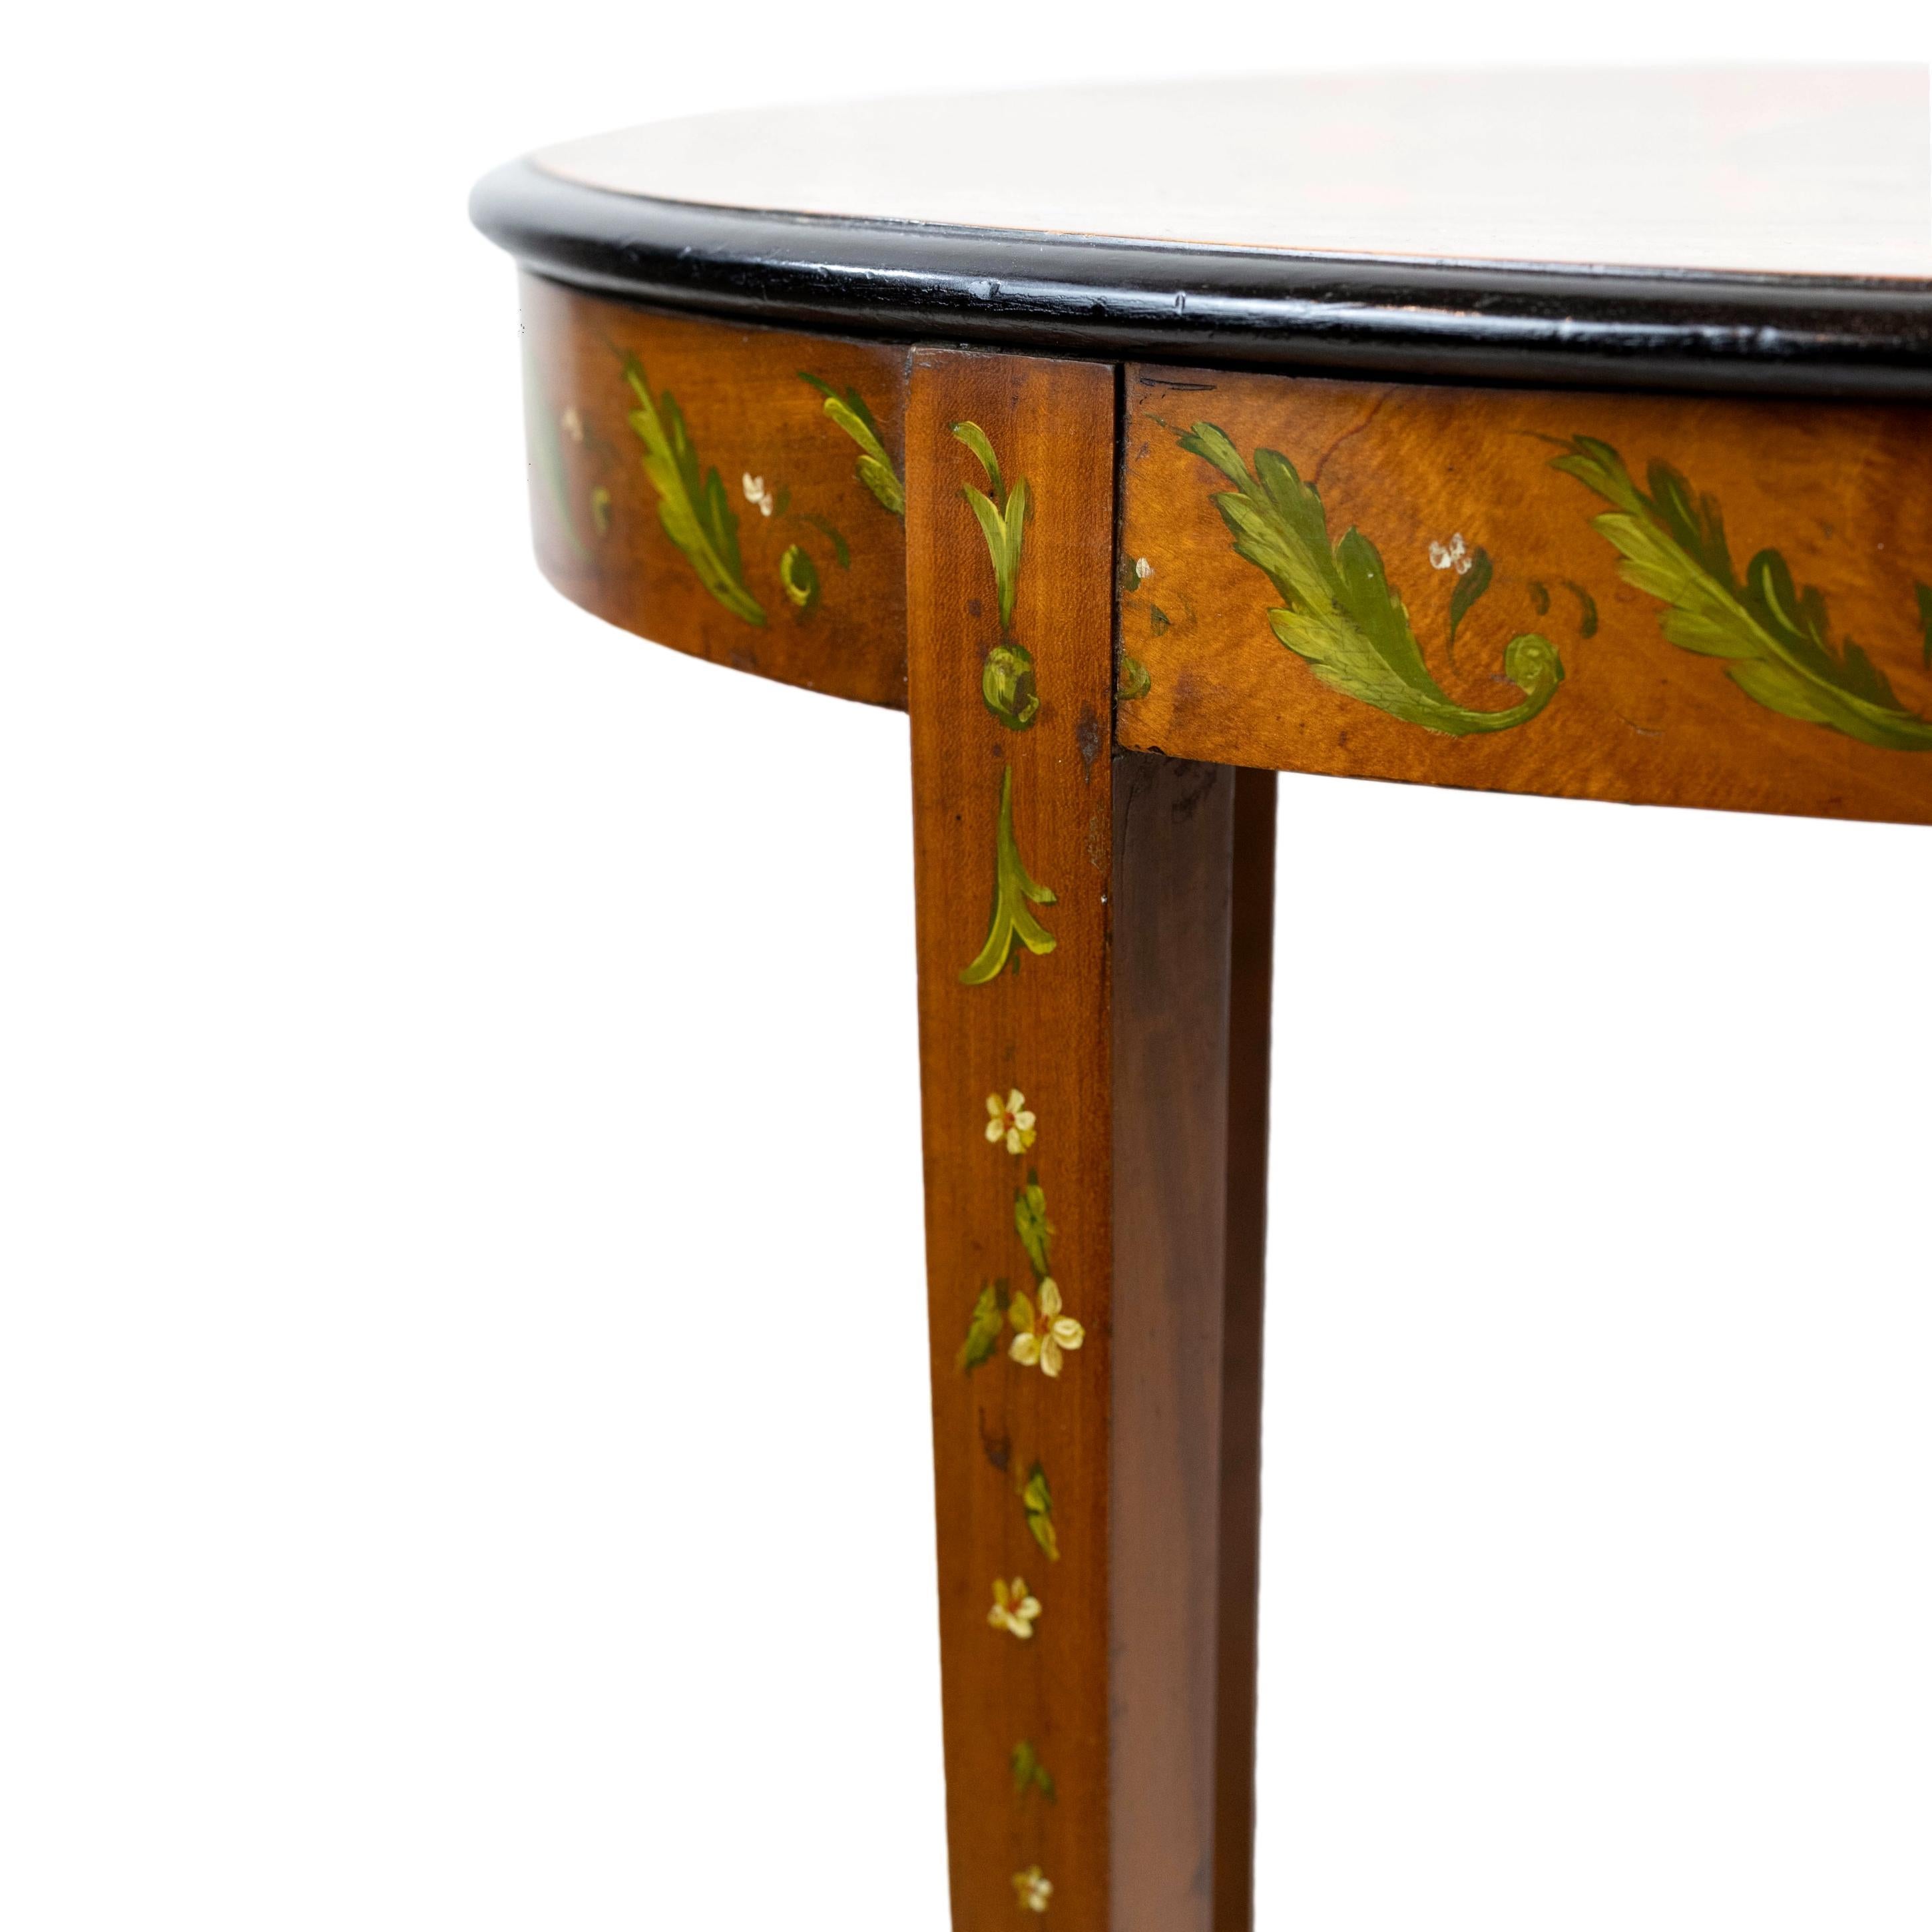 Edwardian Painted Satinwood Two-Tier Occasional Table, English, ca. 1900 For Sale 5